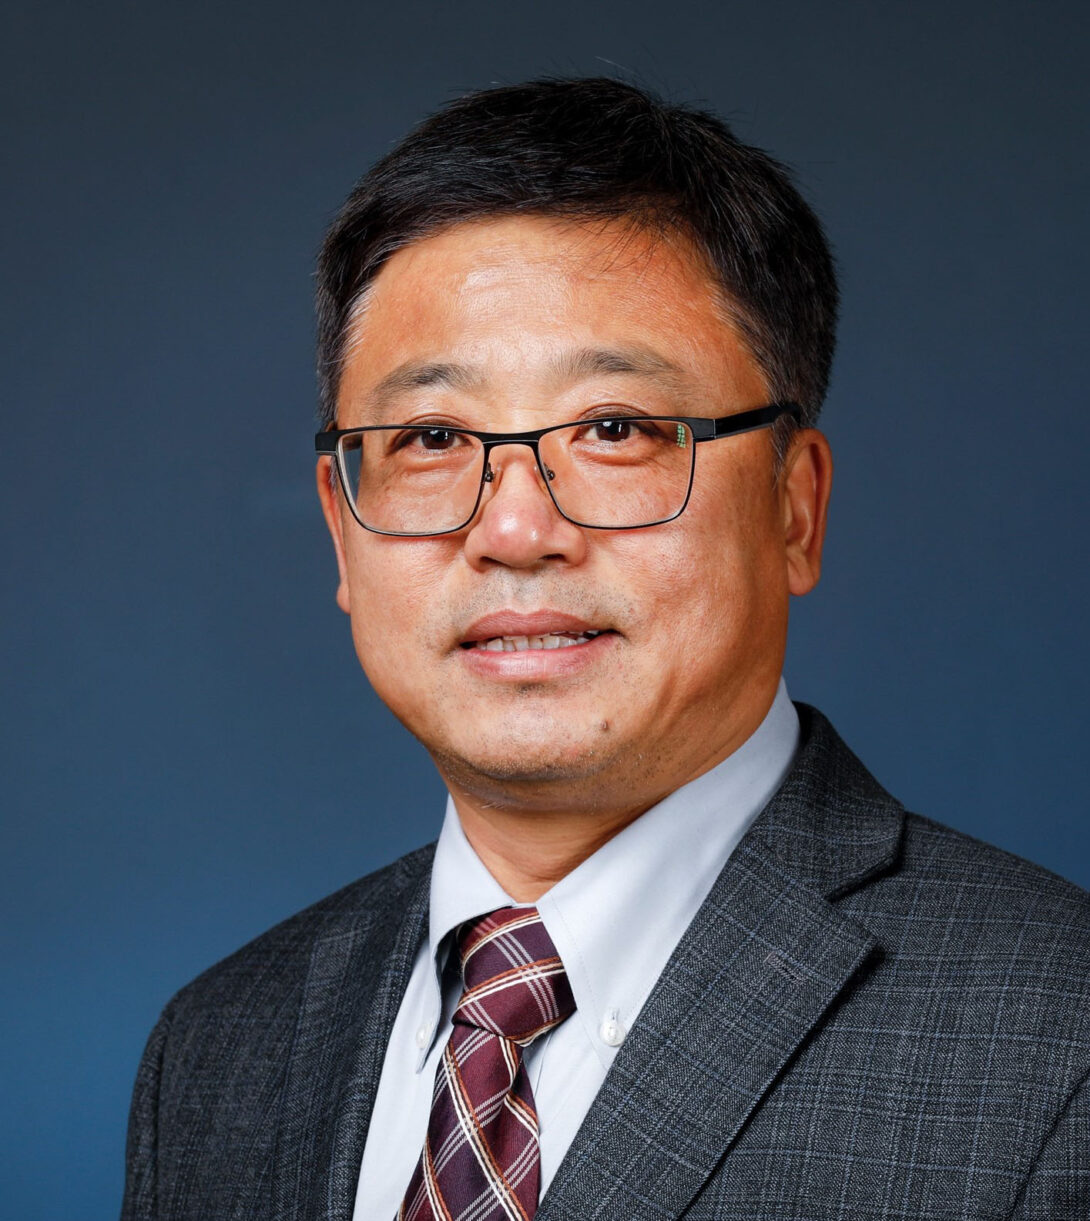 Dr. Xincheng Yao is the Principle Investigator for the Biomedical Optical Imaging and Functional Laboratory housed at the Lions of Illinois Eye Research Institute.